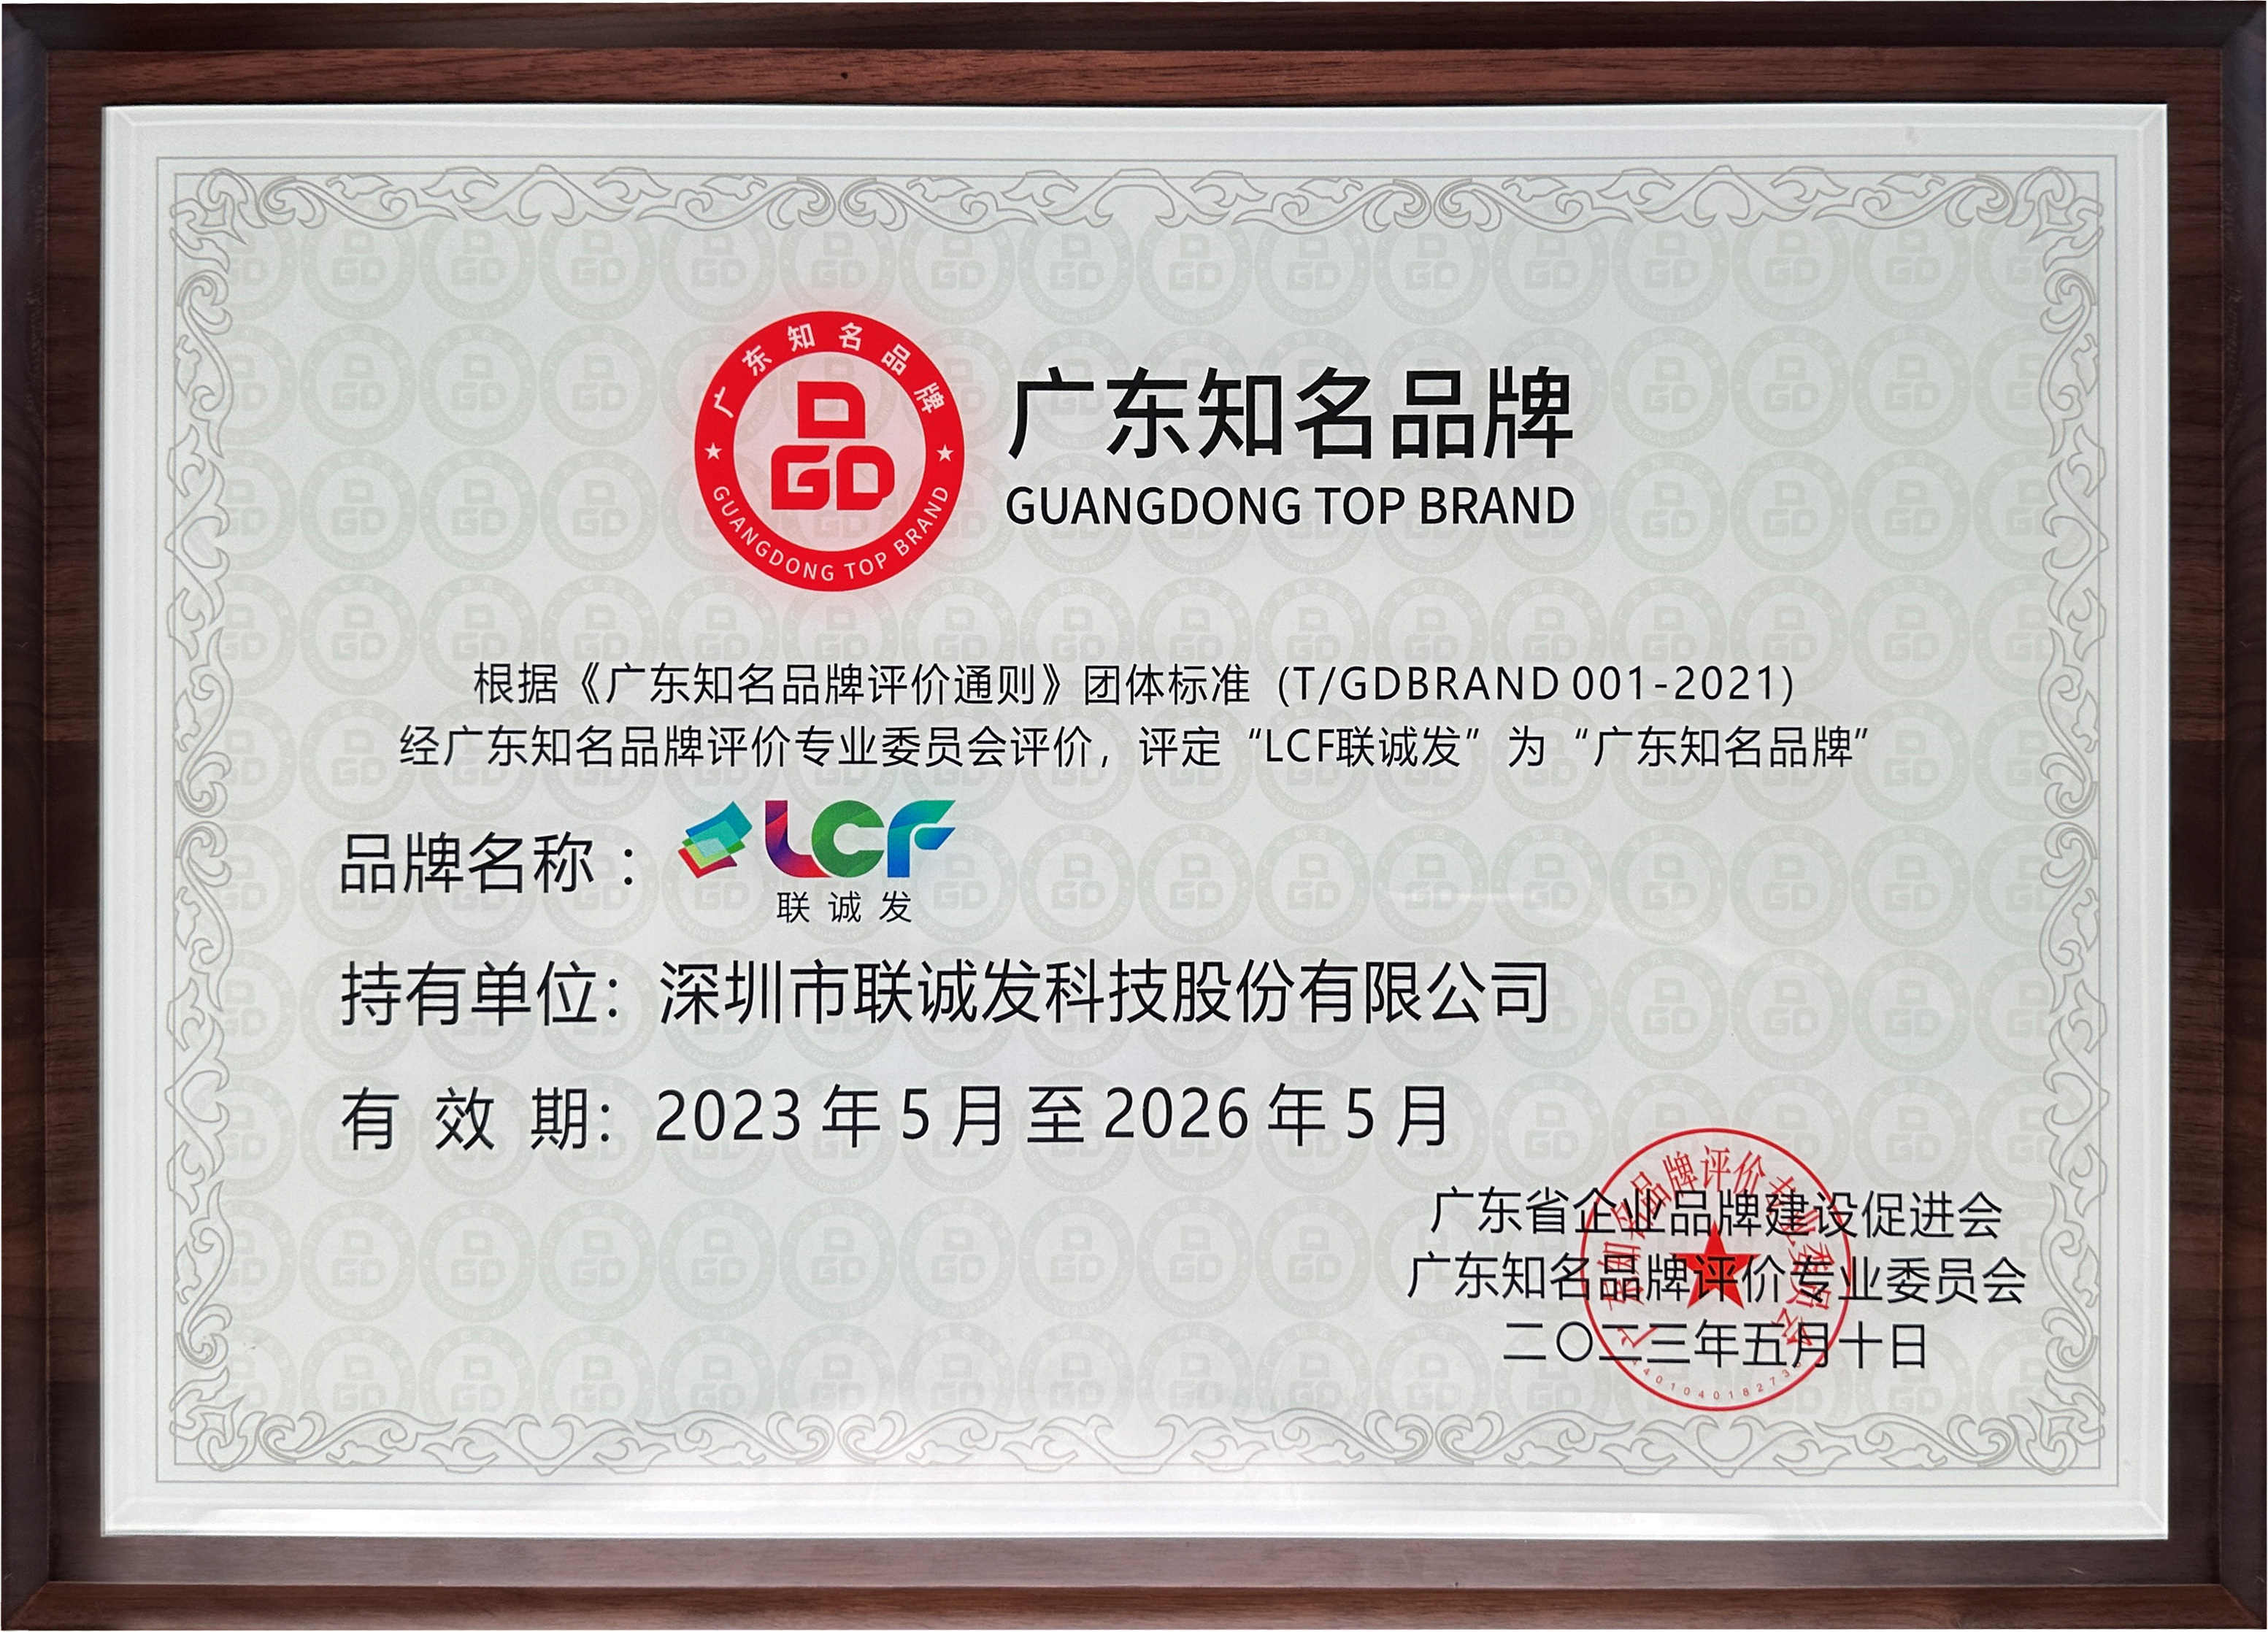 LCF Guangdong famous brand